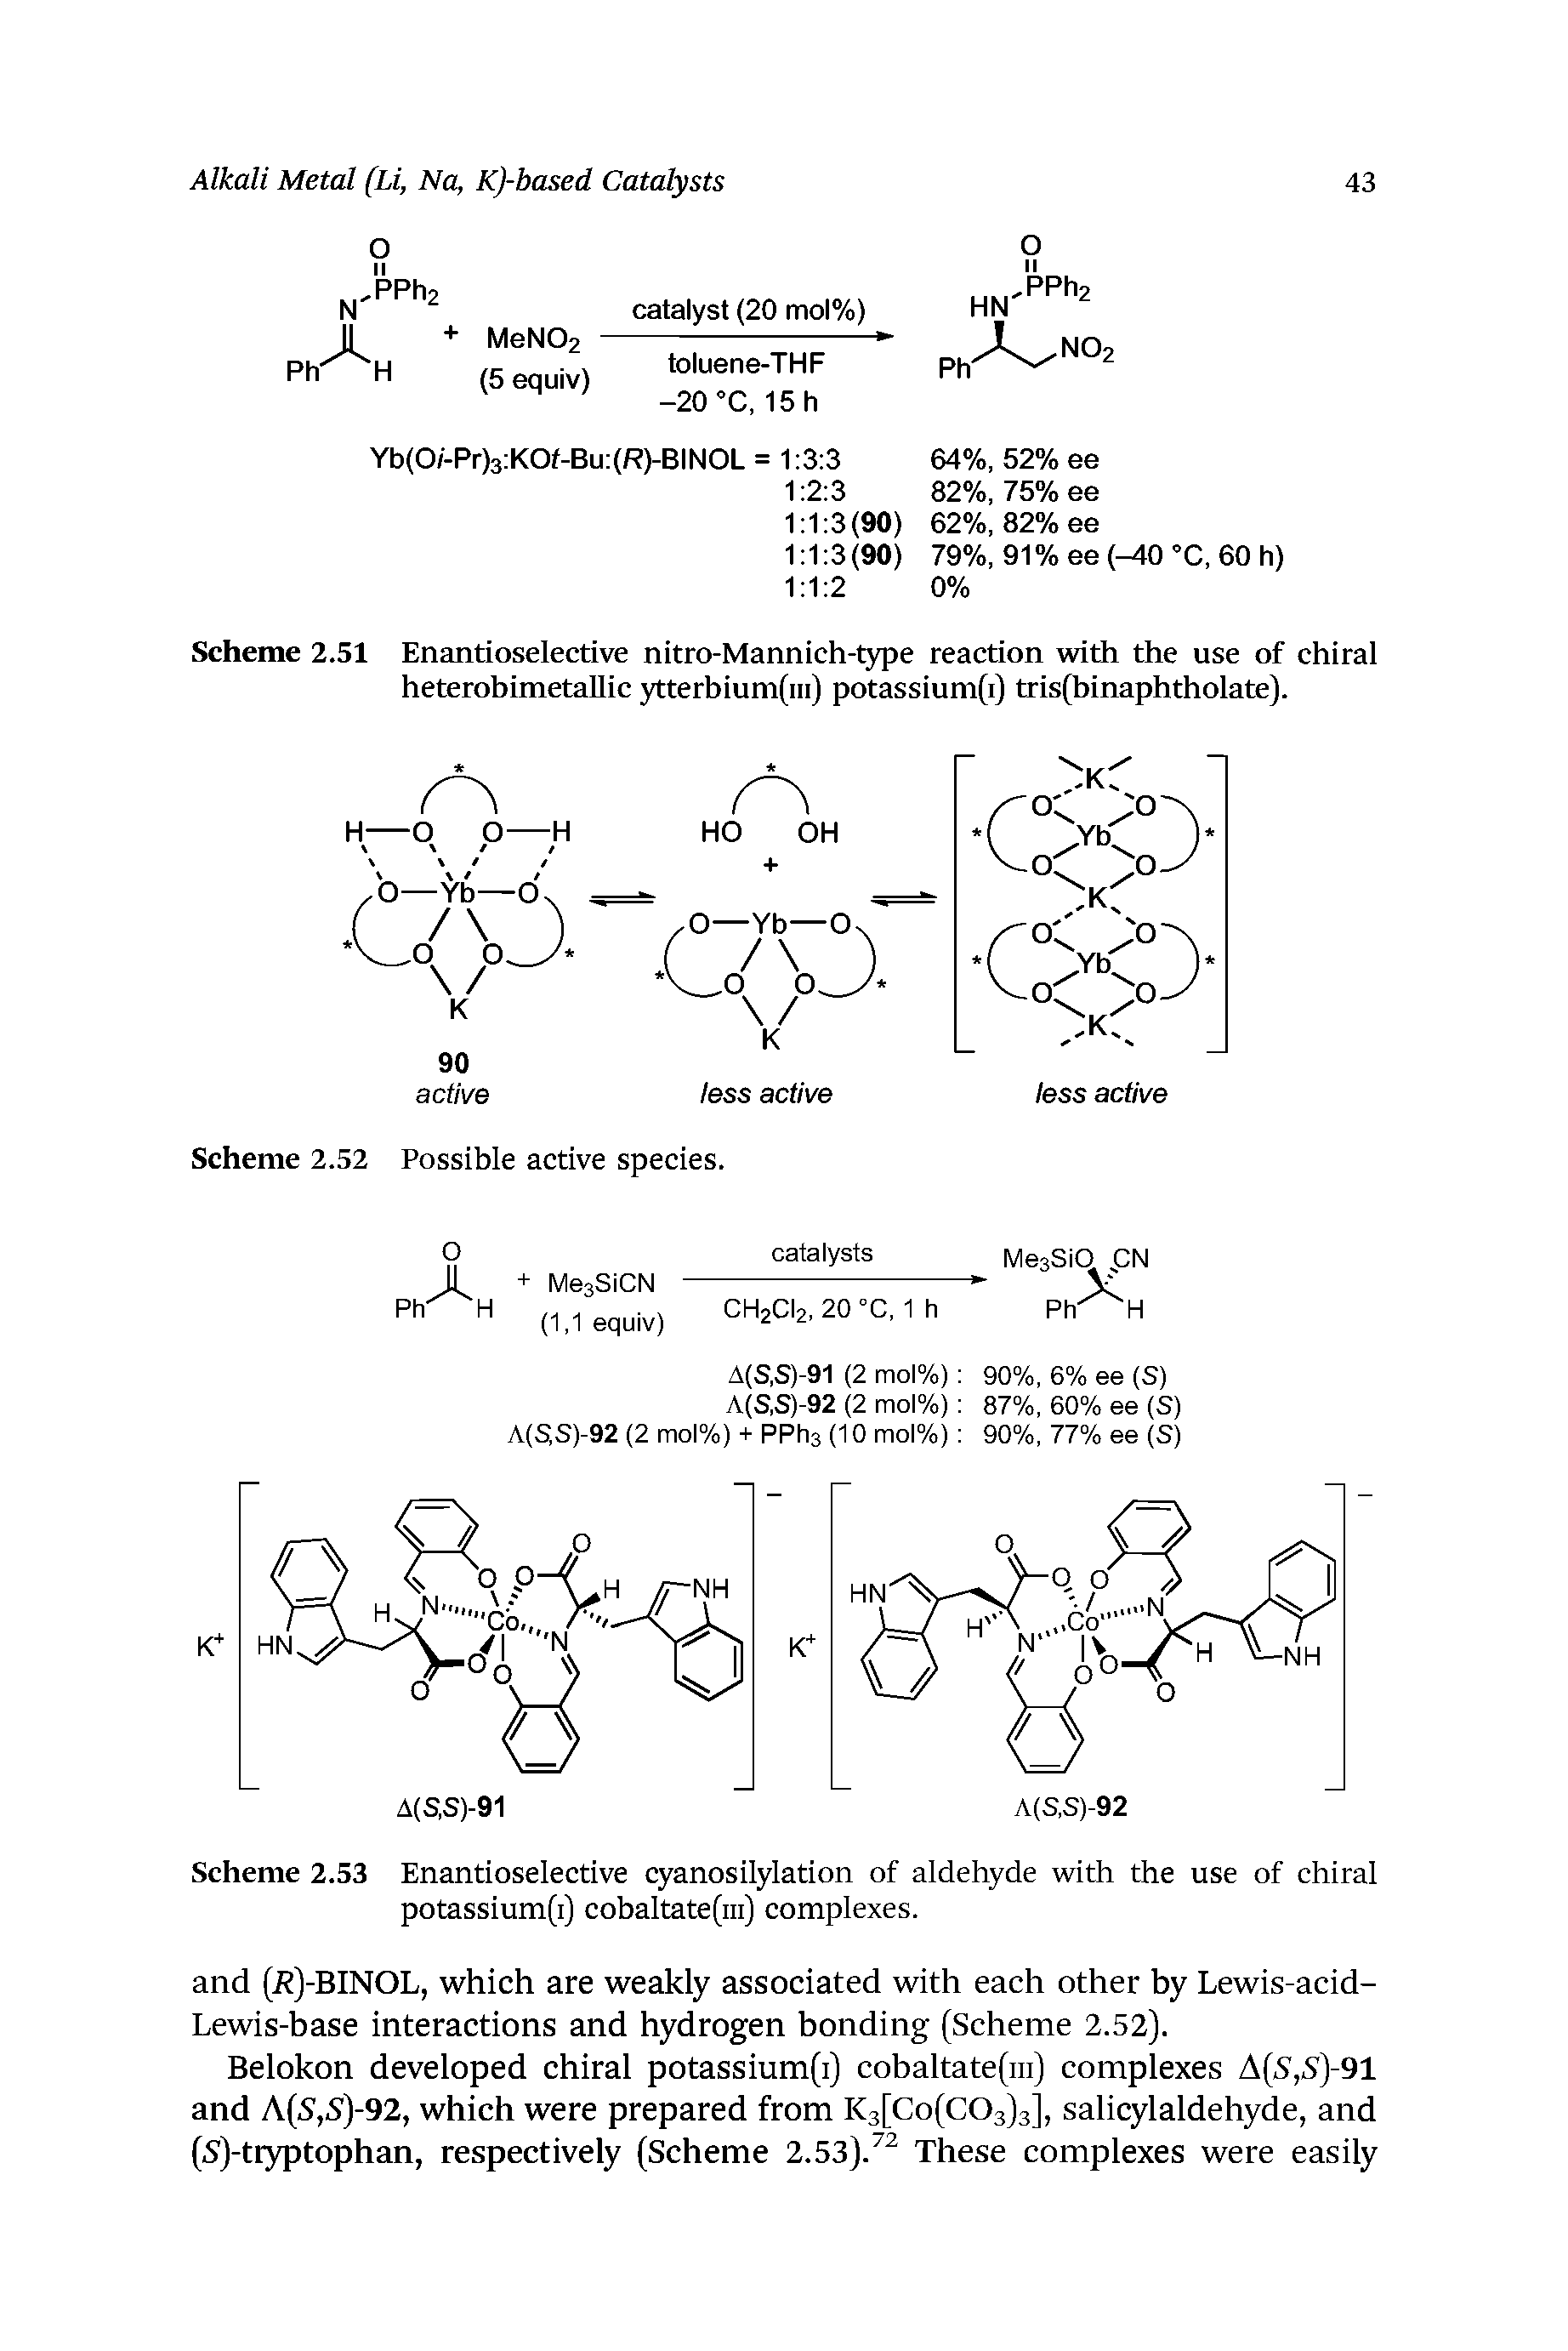 Scheme 2.53 Enantioselective cyanosilylation of aldehyde with the use of chiral potassium(i) cobaltate(iii) complexes.